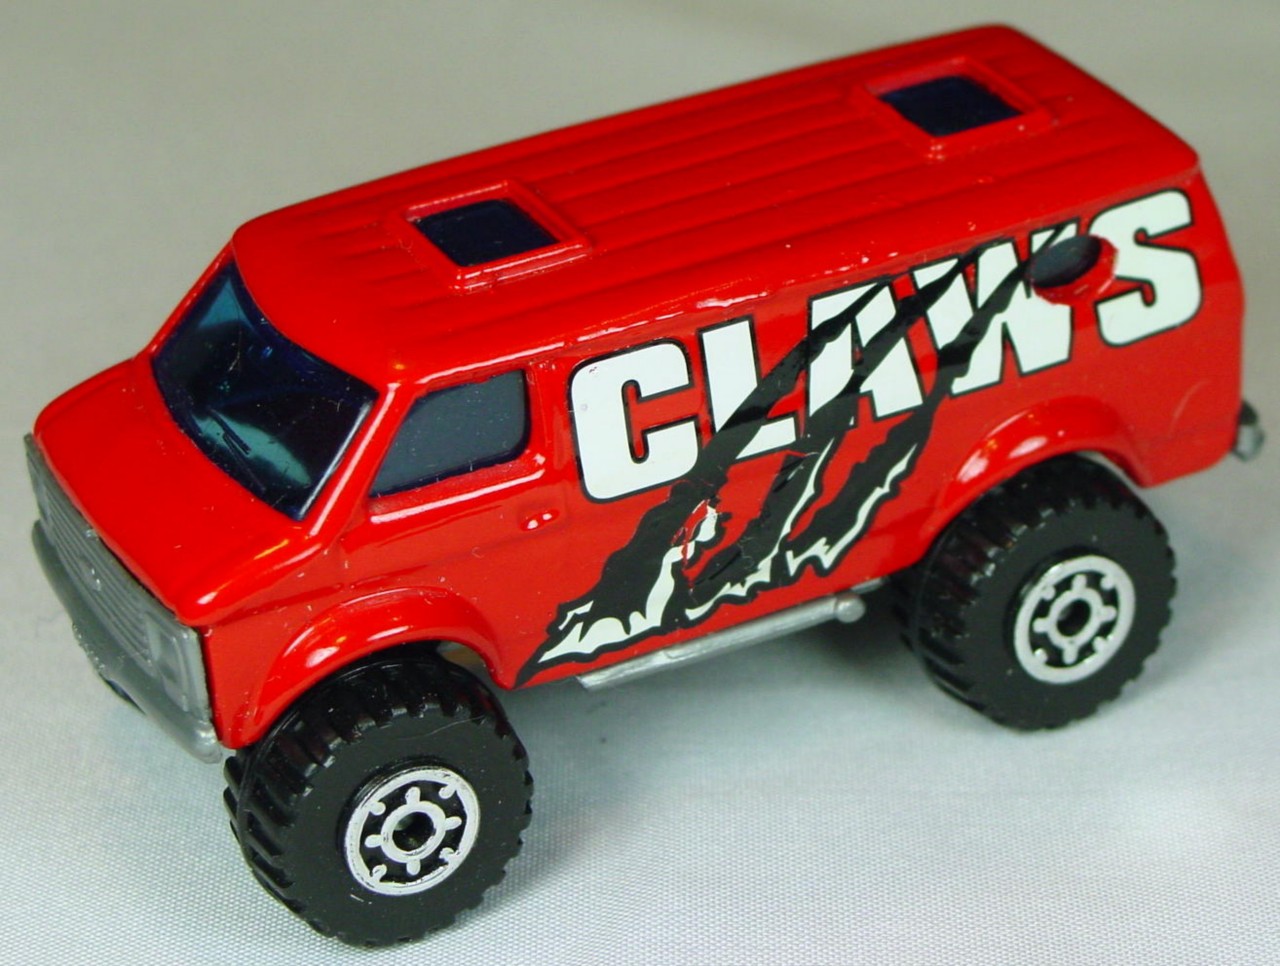 Pre-production 44 D 26 - 4x4 Chevy Van Red grey plastic base Claws LAB made in Thailand